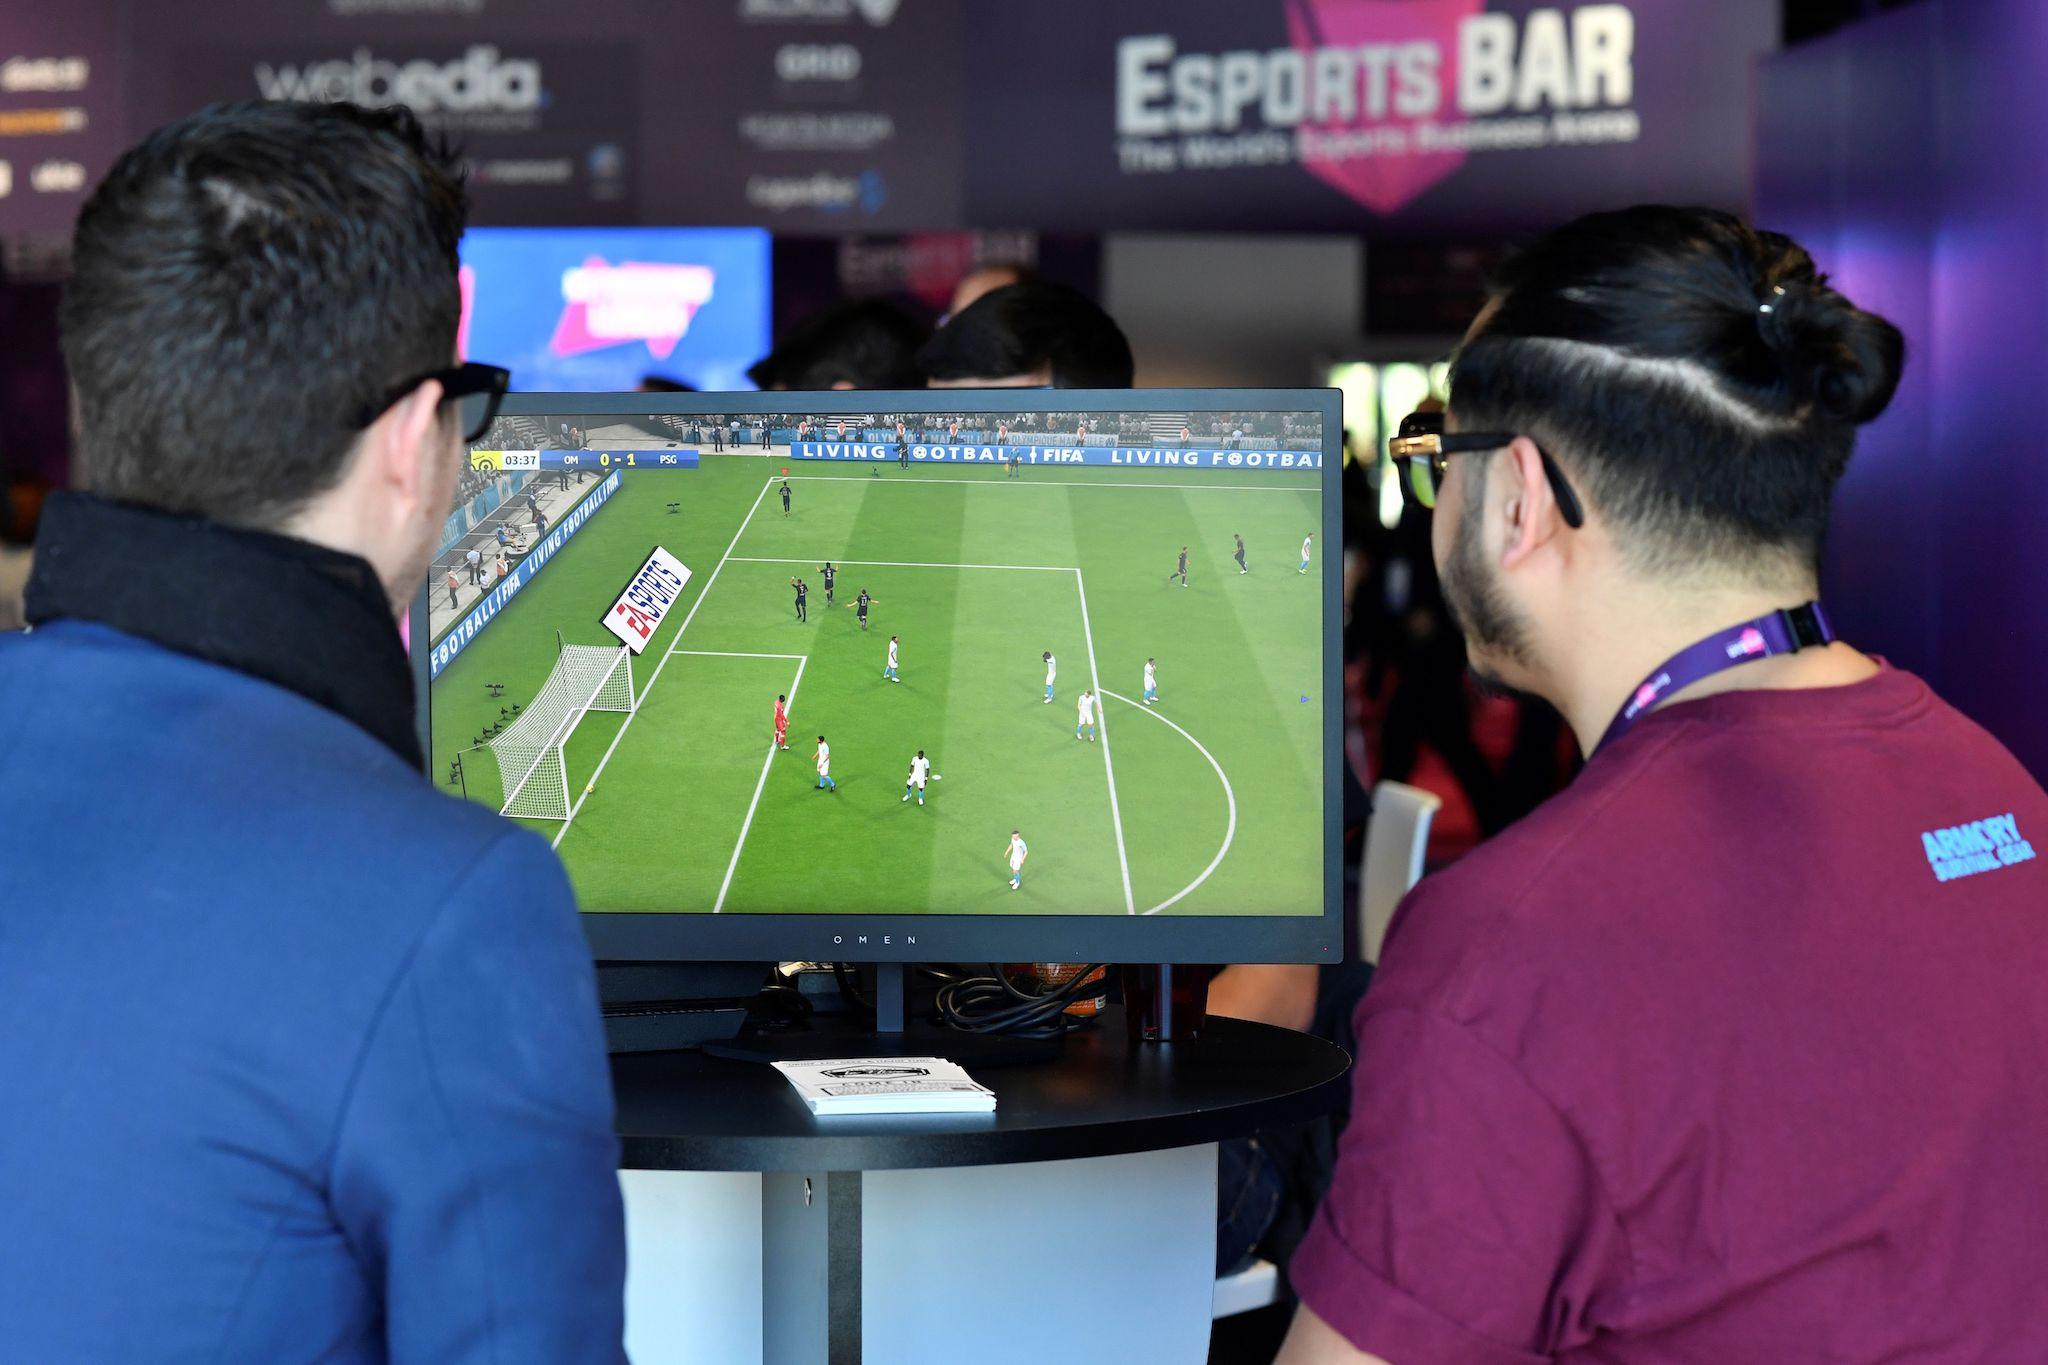 Visitors plays on EA Vancouver video game developer's football simulation video game FIFA 19 at the eSports Bar trade fair in Cannes, southern France on February 13, 2019